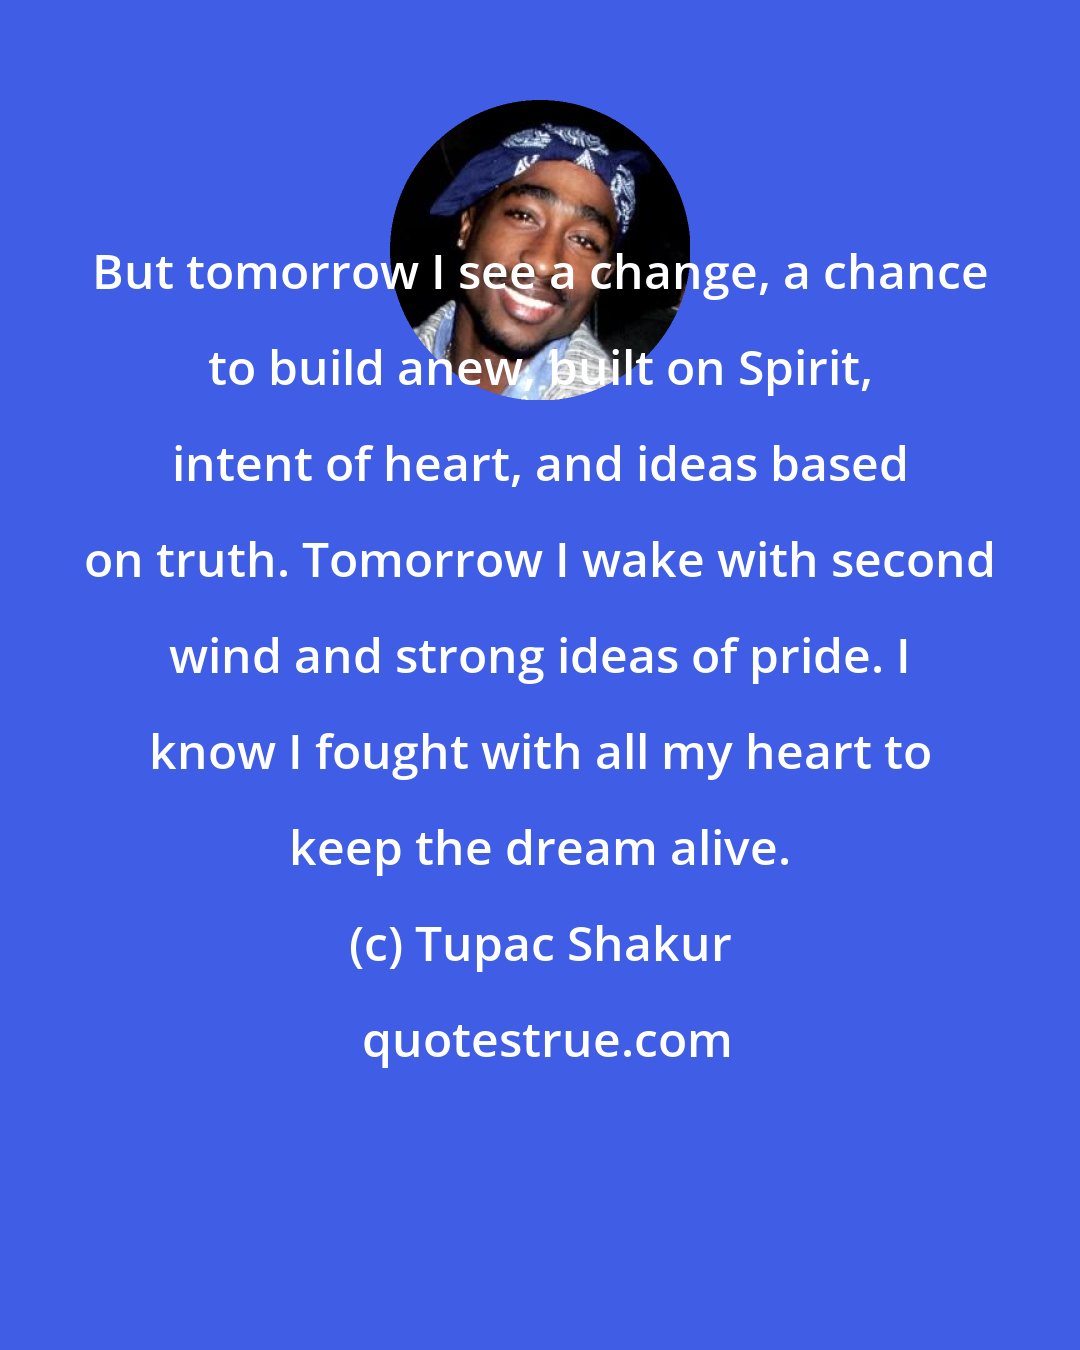 Tupac Shakur: But tomorrow I see a change, a chance to build anew, built on Spirit, intent of heart, and ideas based on truth. Tomorrow I wake with second wind and strong ideas of pride. I know I fought with all my heart to keep the dream alive.